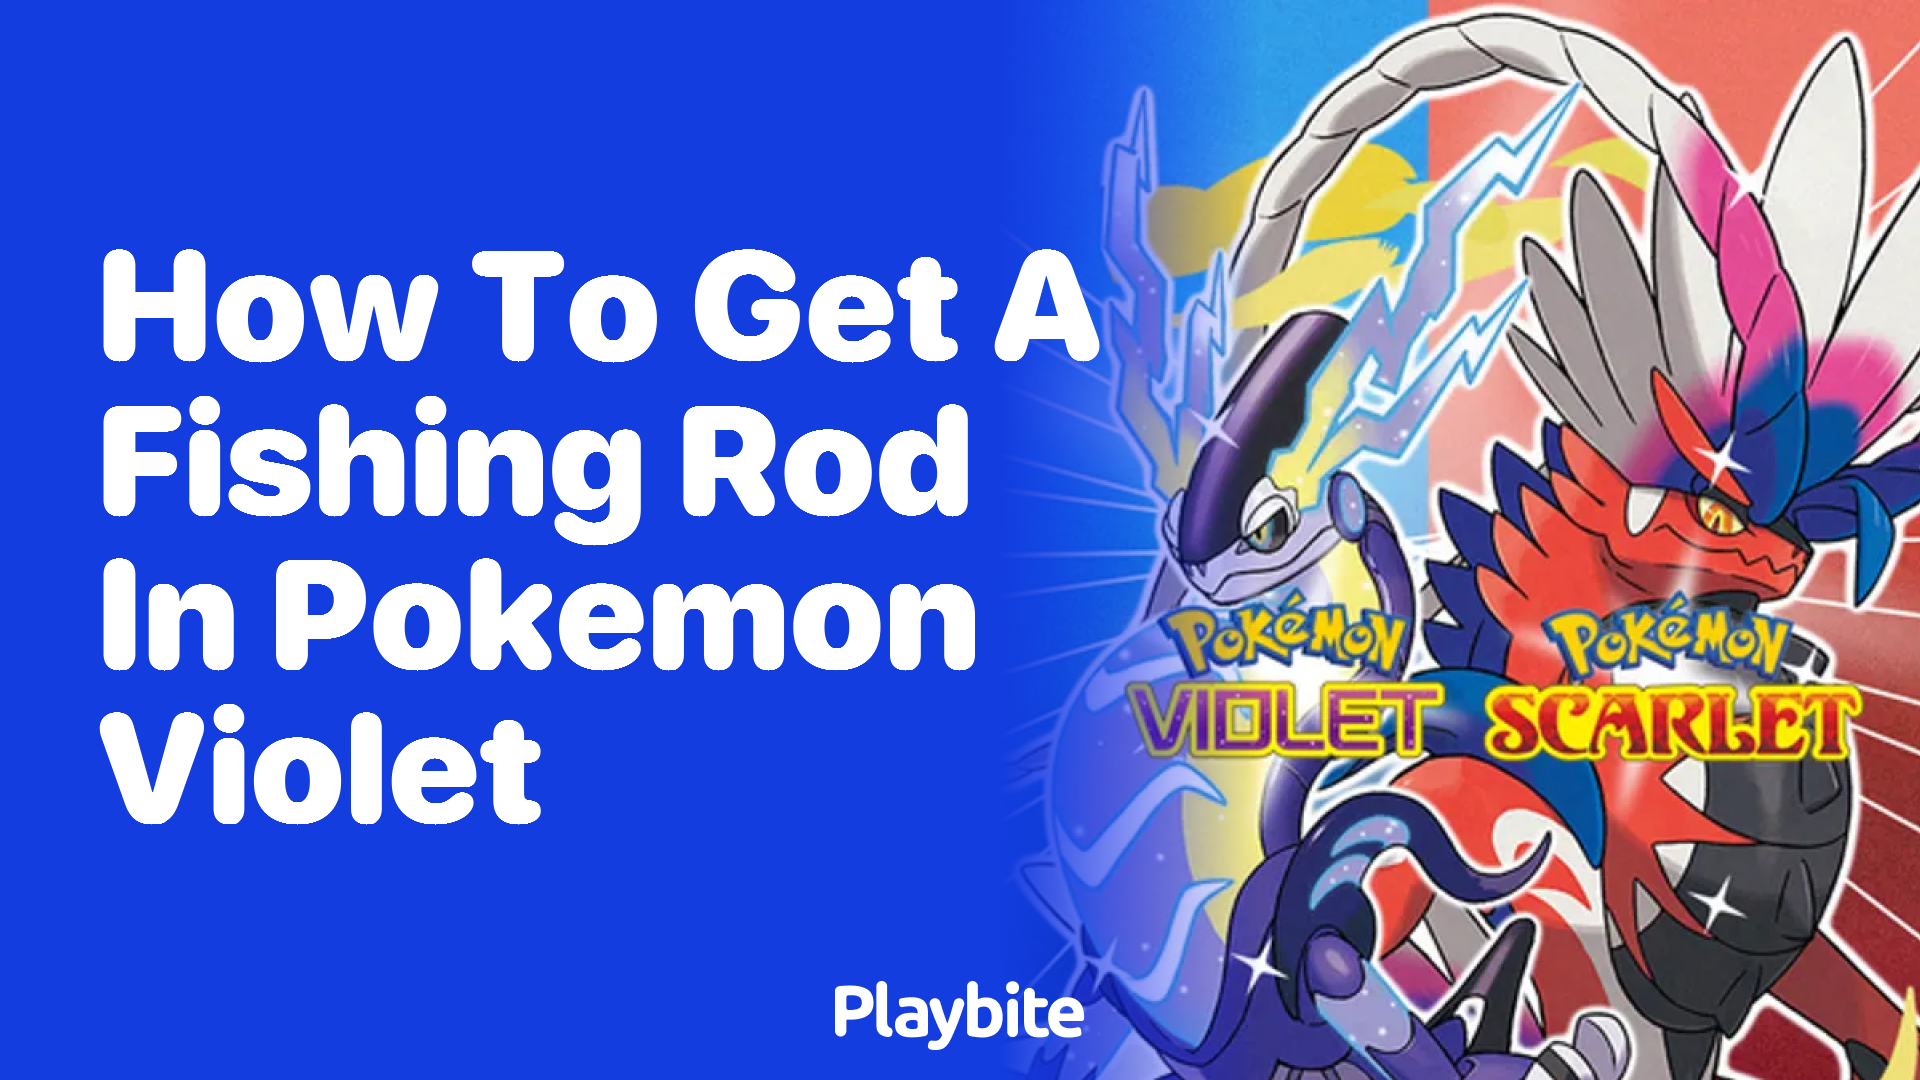 How to get a Fishing Rod in Pokémon Violet - Playbite